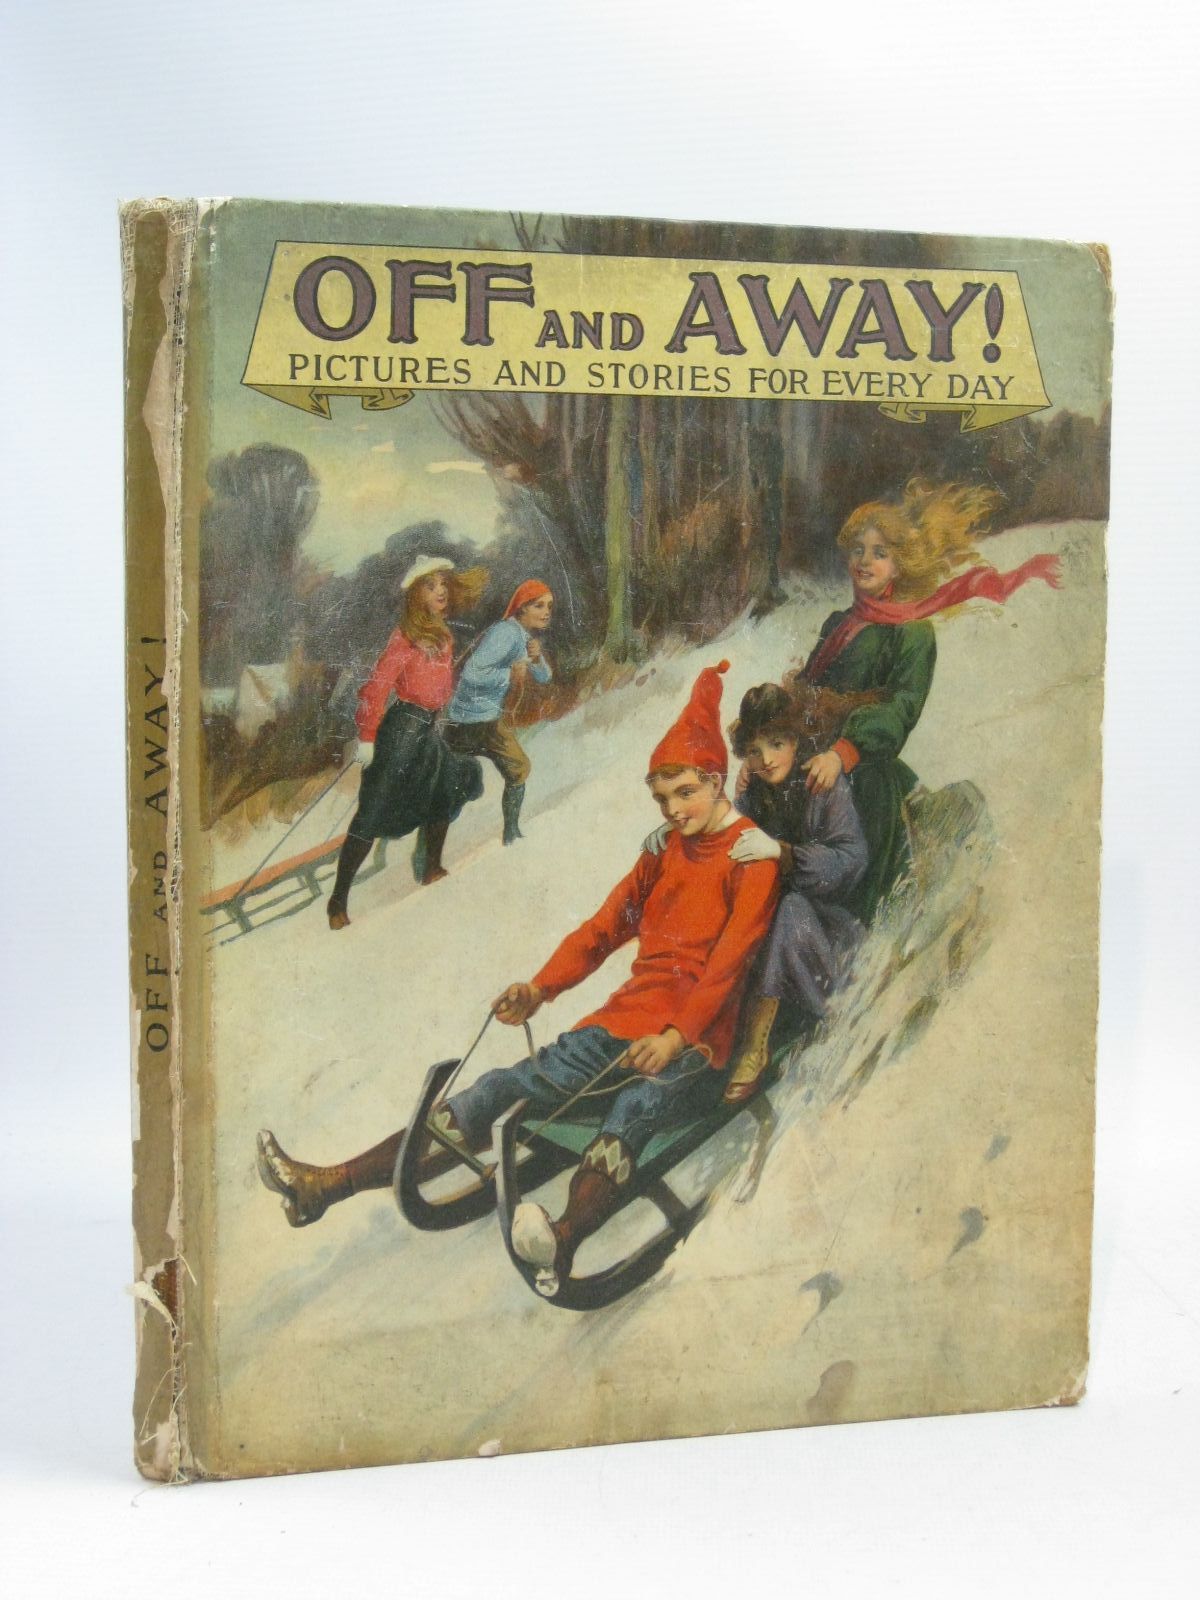 Photo of OFF AND AWAY! PICTURES AND STORIES FOR EVERY DAY written by Inchfawn, Fay
Barks, Ethel J.
Braine, Sheila E.
et al, illustrated by Aris, Ernest A.
Bowley, A.L.
Blomfield, Elsie published by S.W. Partridge & Co. Ltd. (STOCK CODE: 1404829)  for sale by Stella & Rose's Books